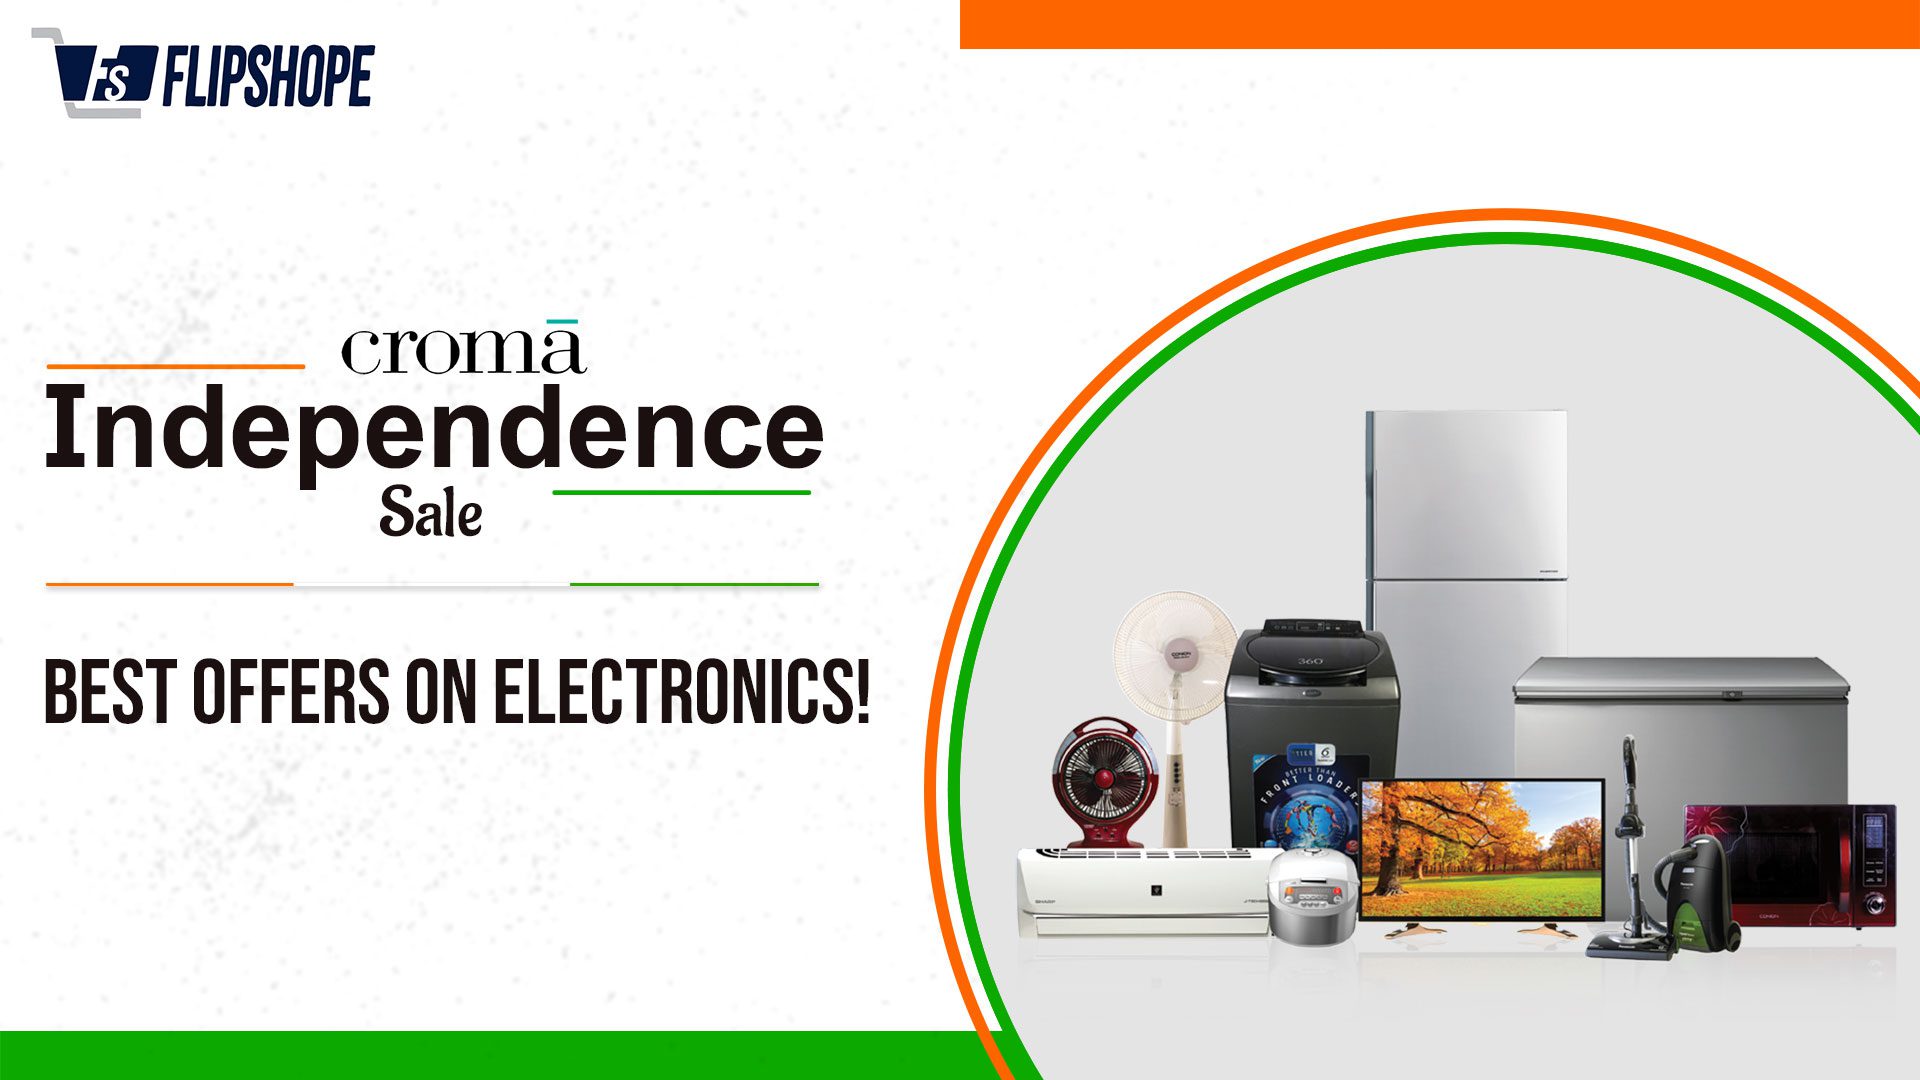 Croma Independence Sale